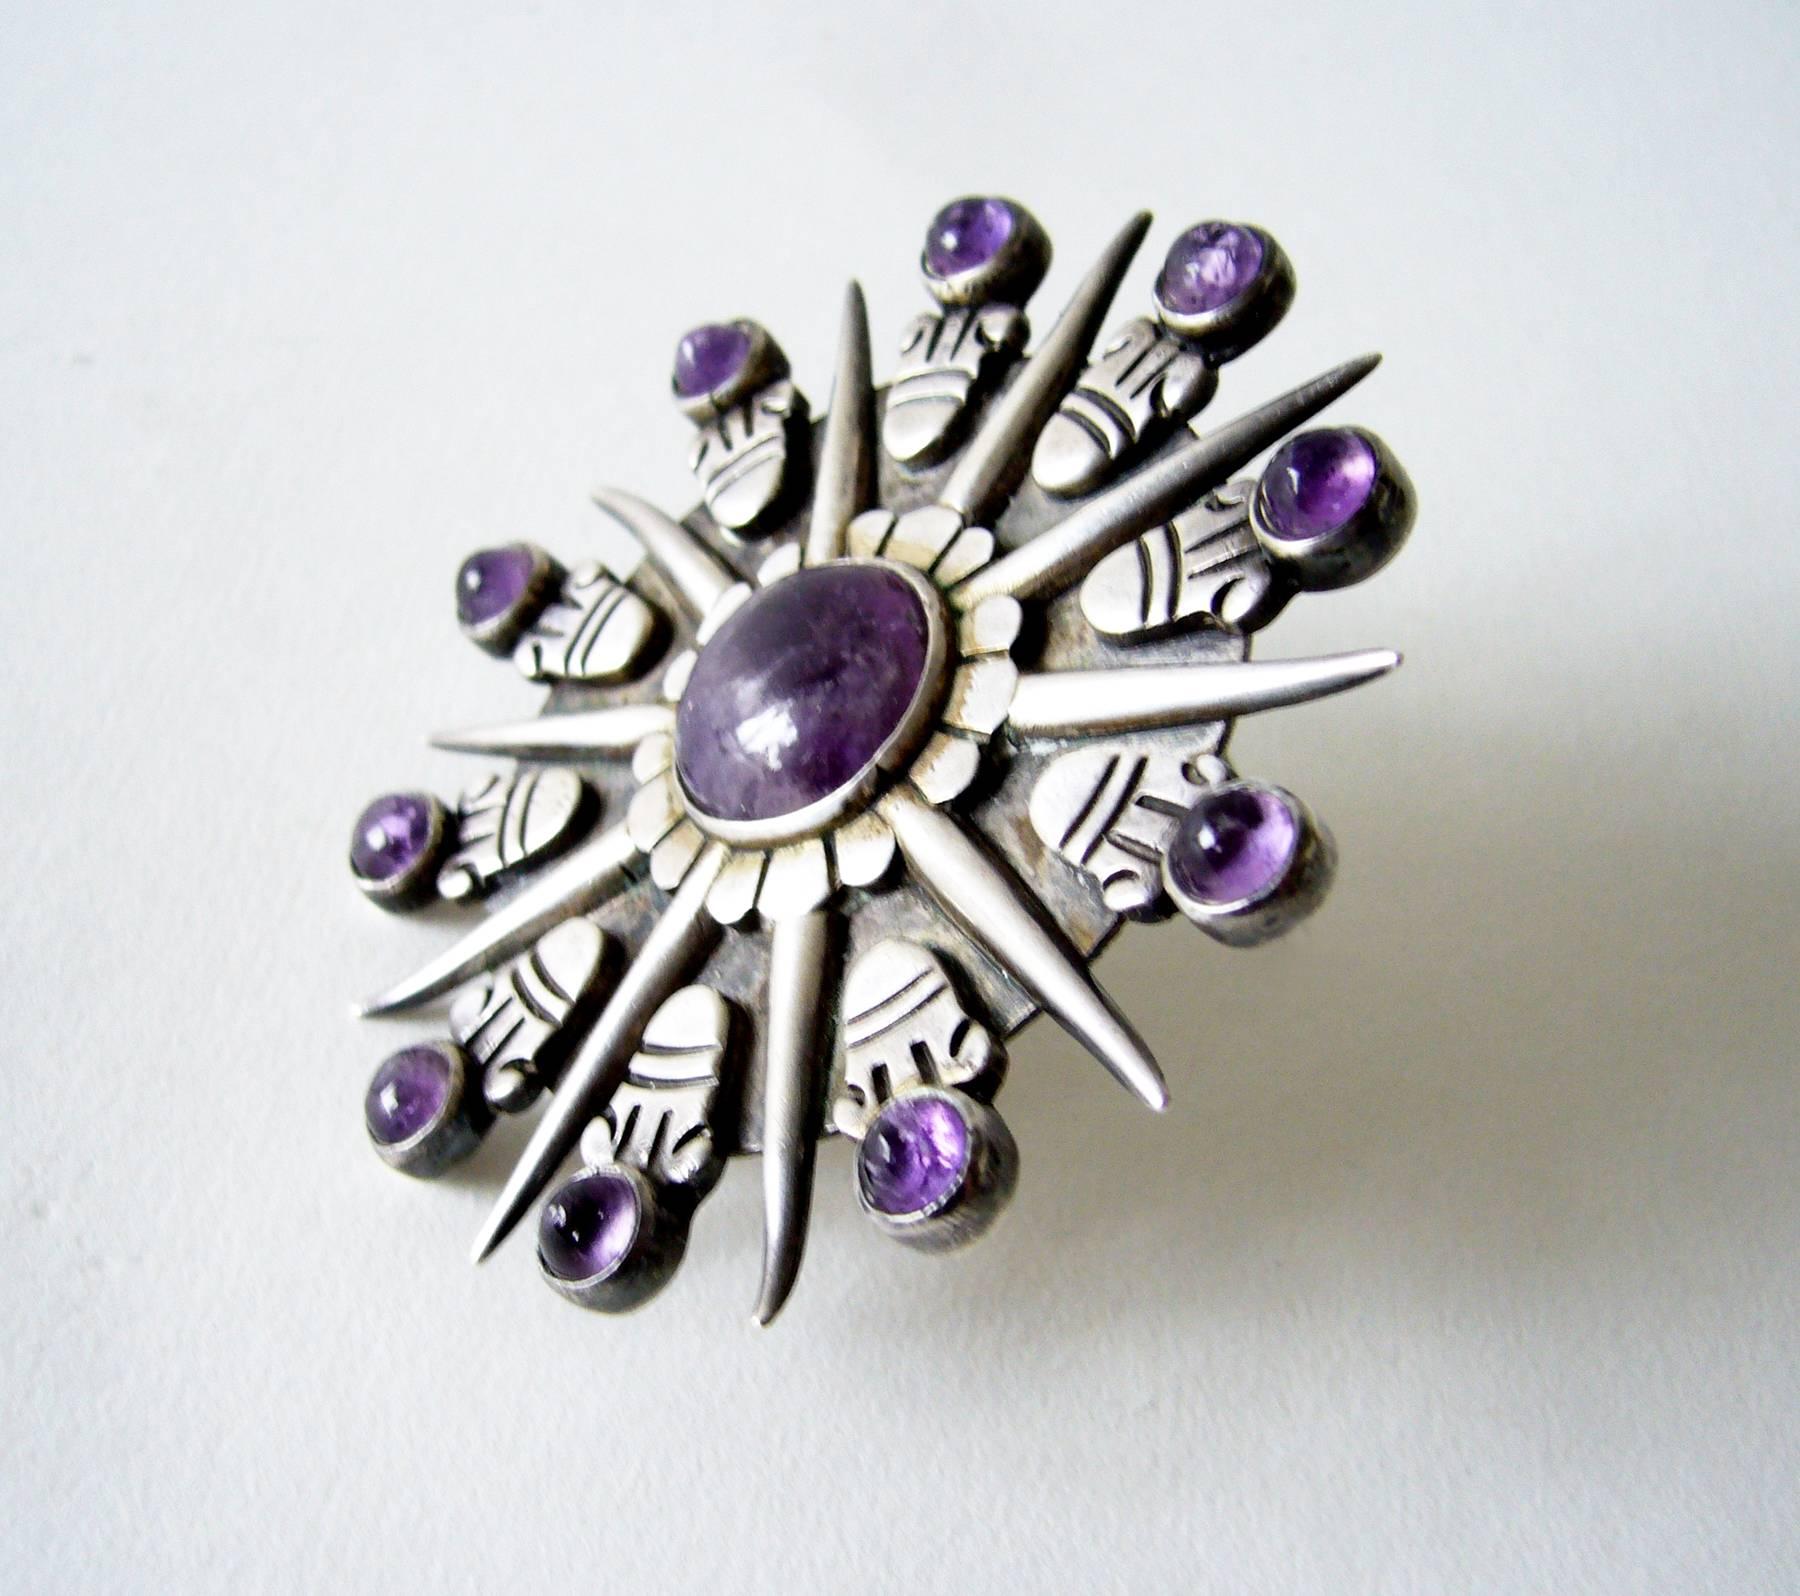 Iconic Aztec sunburst amethyst and sterling silver brooch designed and created by William Spratling of Taxco, Mexico. Brooch measures a large 3